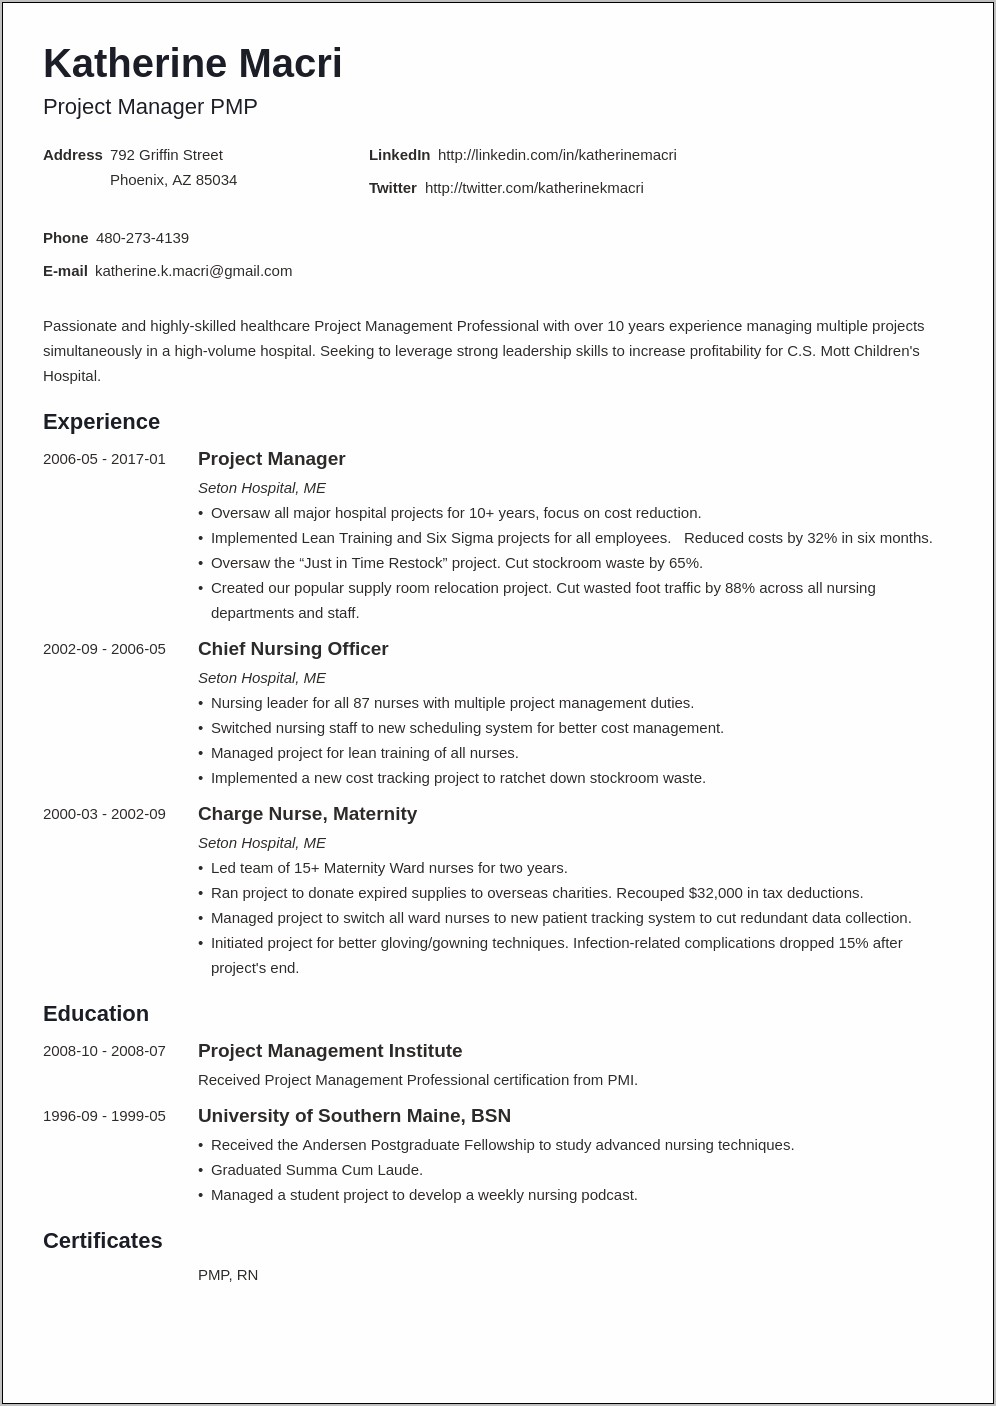 Functional Resume For Project Manager